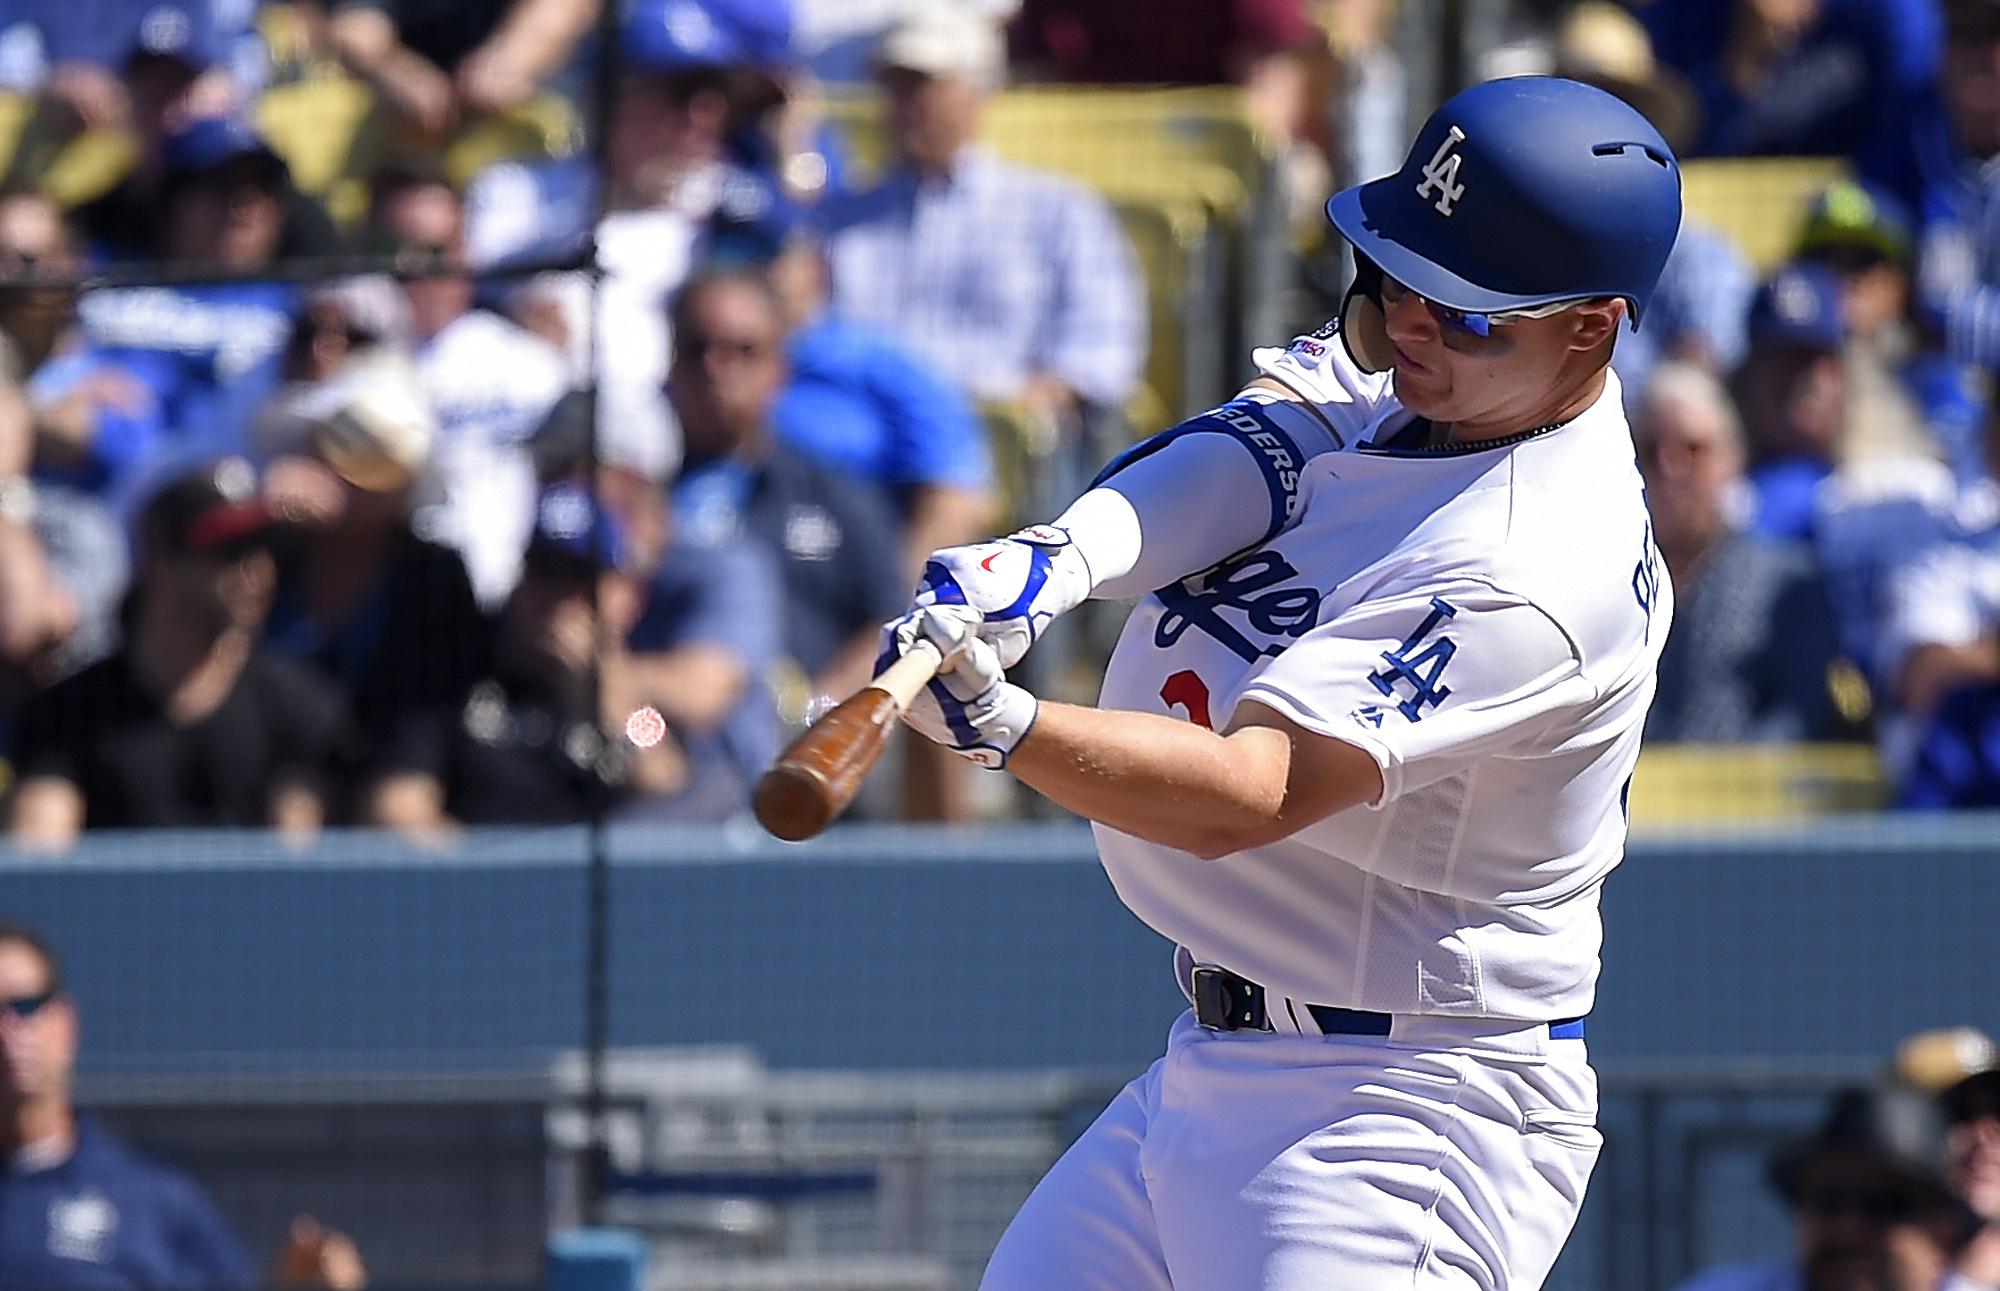 Dodgers' Joc Pederson driven by brother Champ